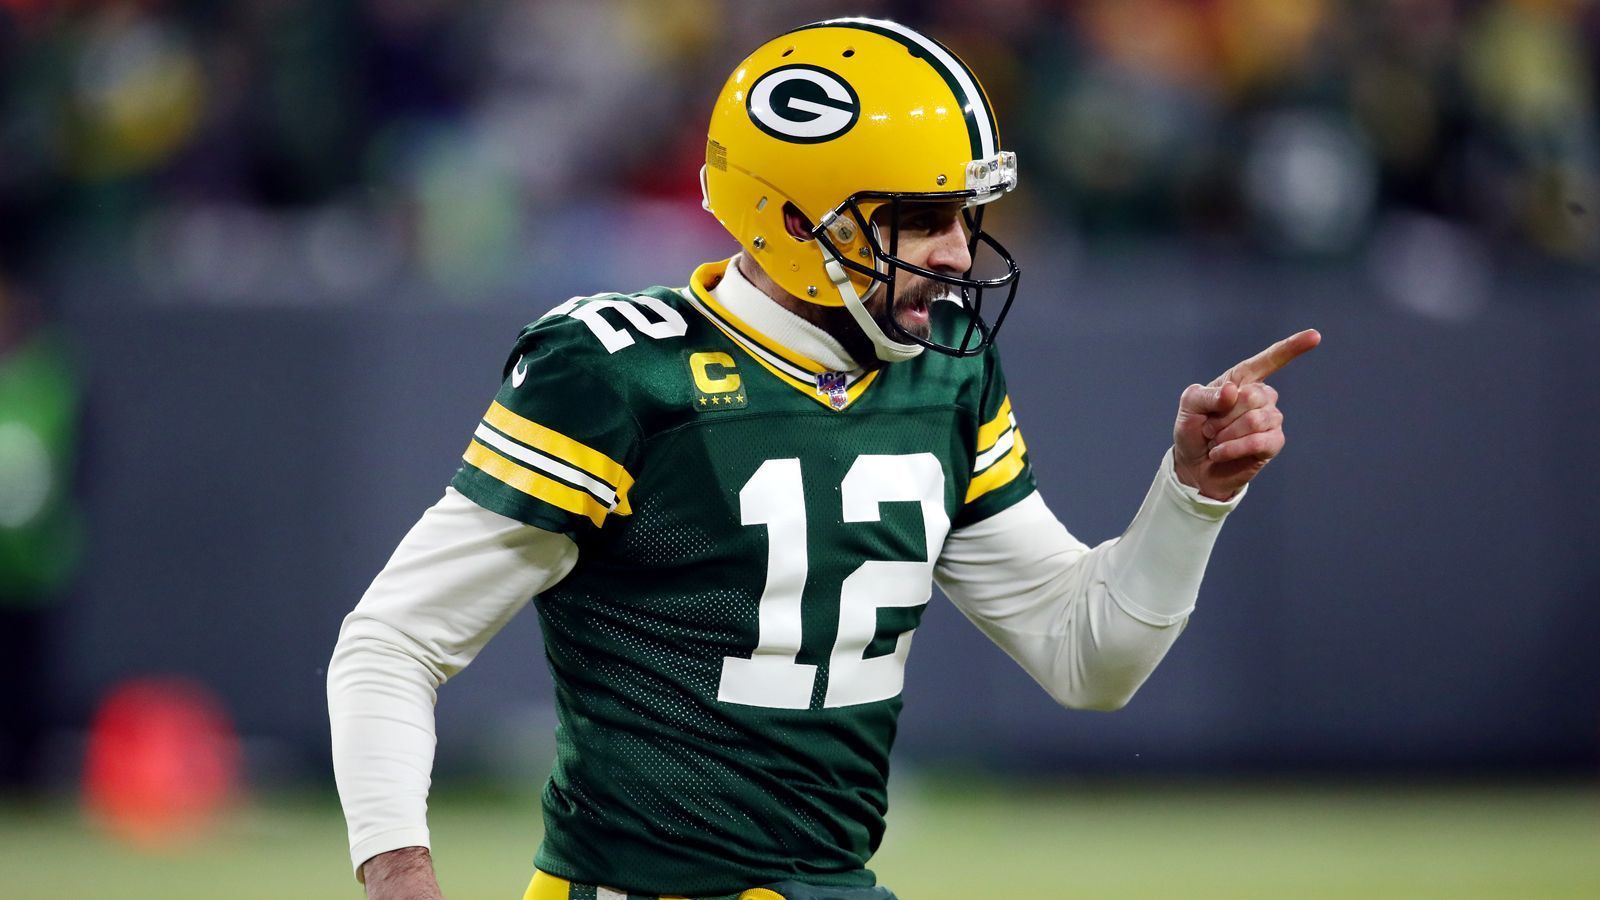 
                <strong>Platz 7: Aaron Rodgers</strong><br>
                Team: Green Bay PackersPosition: Quarterback
              